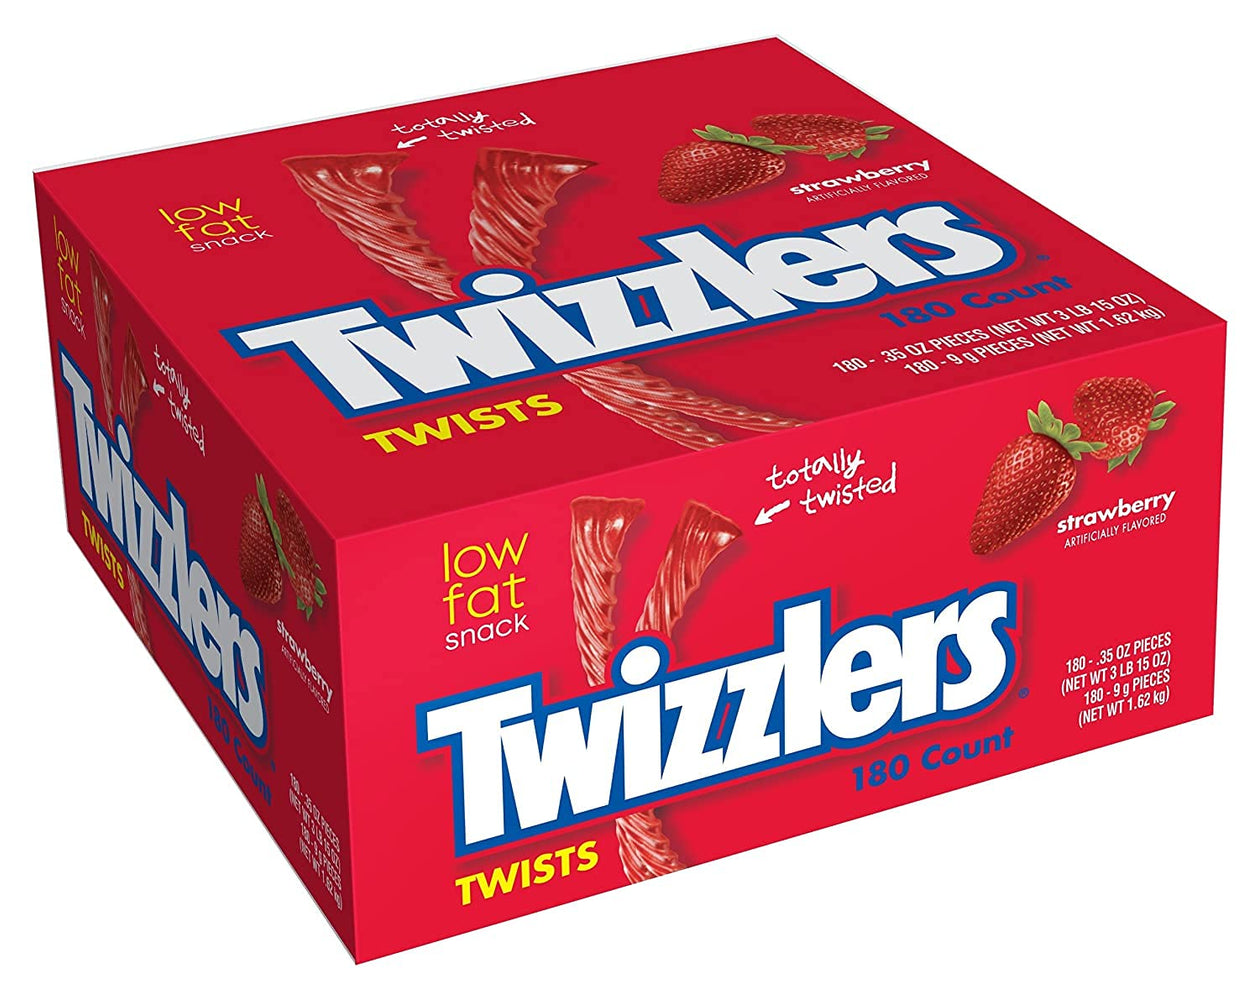 Twizzlers, Individually Wrapped Strawberry Twists, 180-Count 0.31 oz each, net wt. 3 lb. 9 oz. 180 Count (Pack of 1)